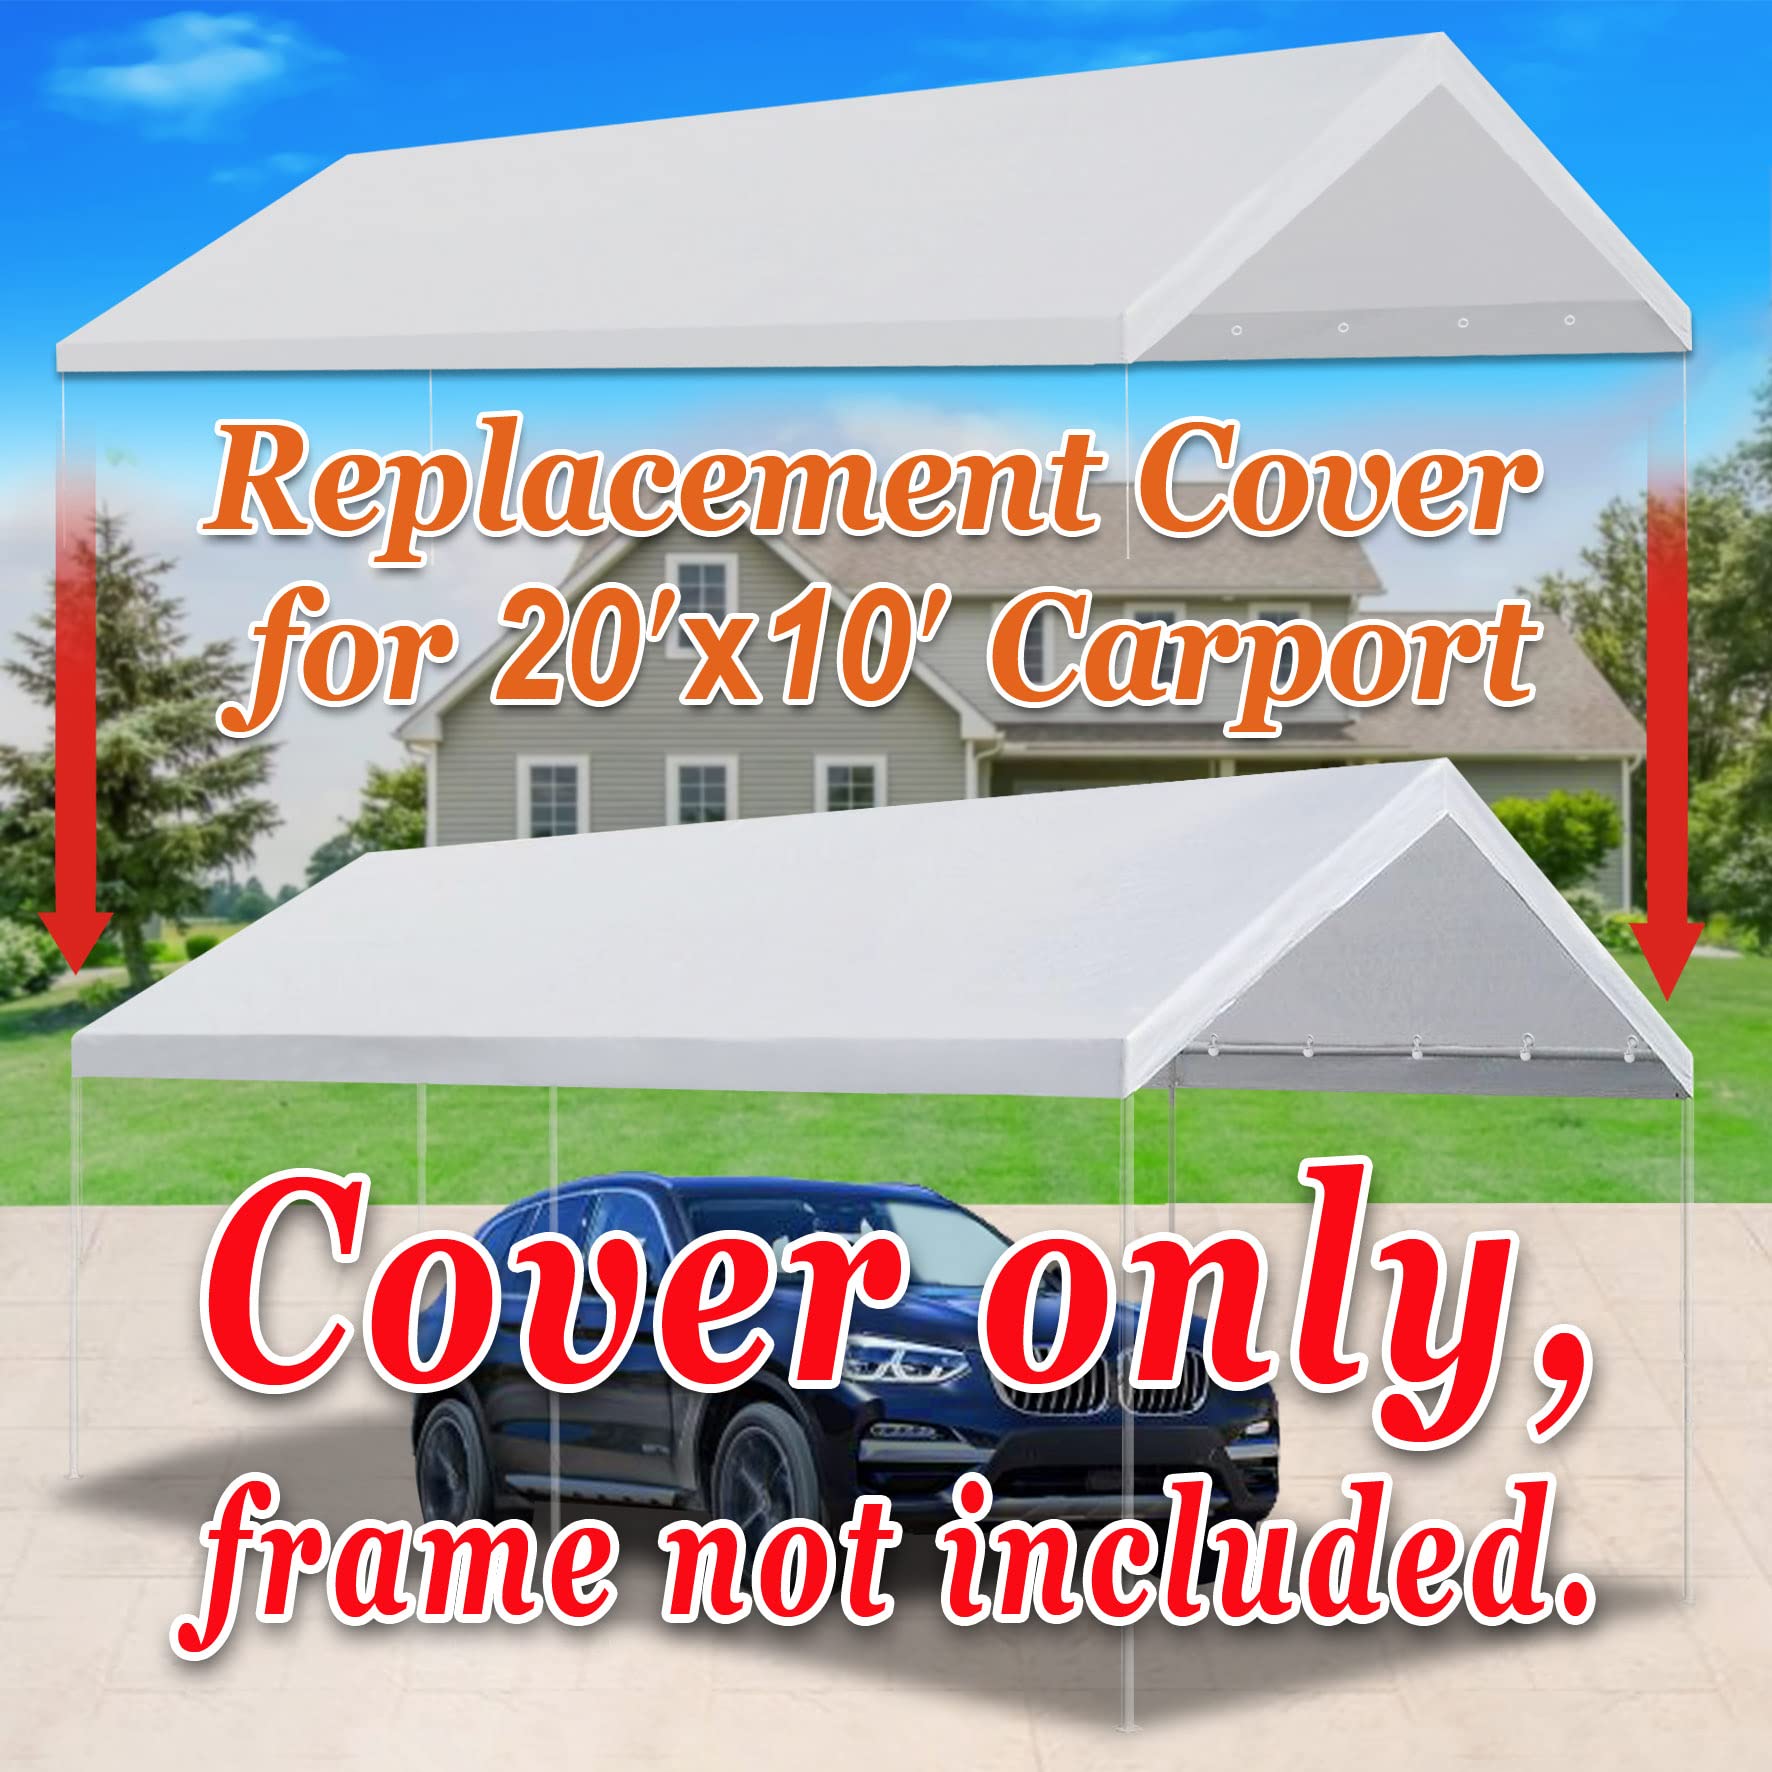 Strong Camel 10 x 20 Carport Canopy Replacement Cover Valance Canopy Replacements Top with Ball Bungees White (Only Cover, Frame is not Included)